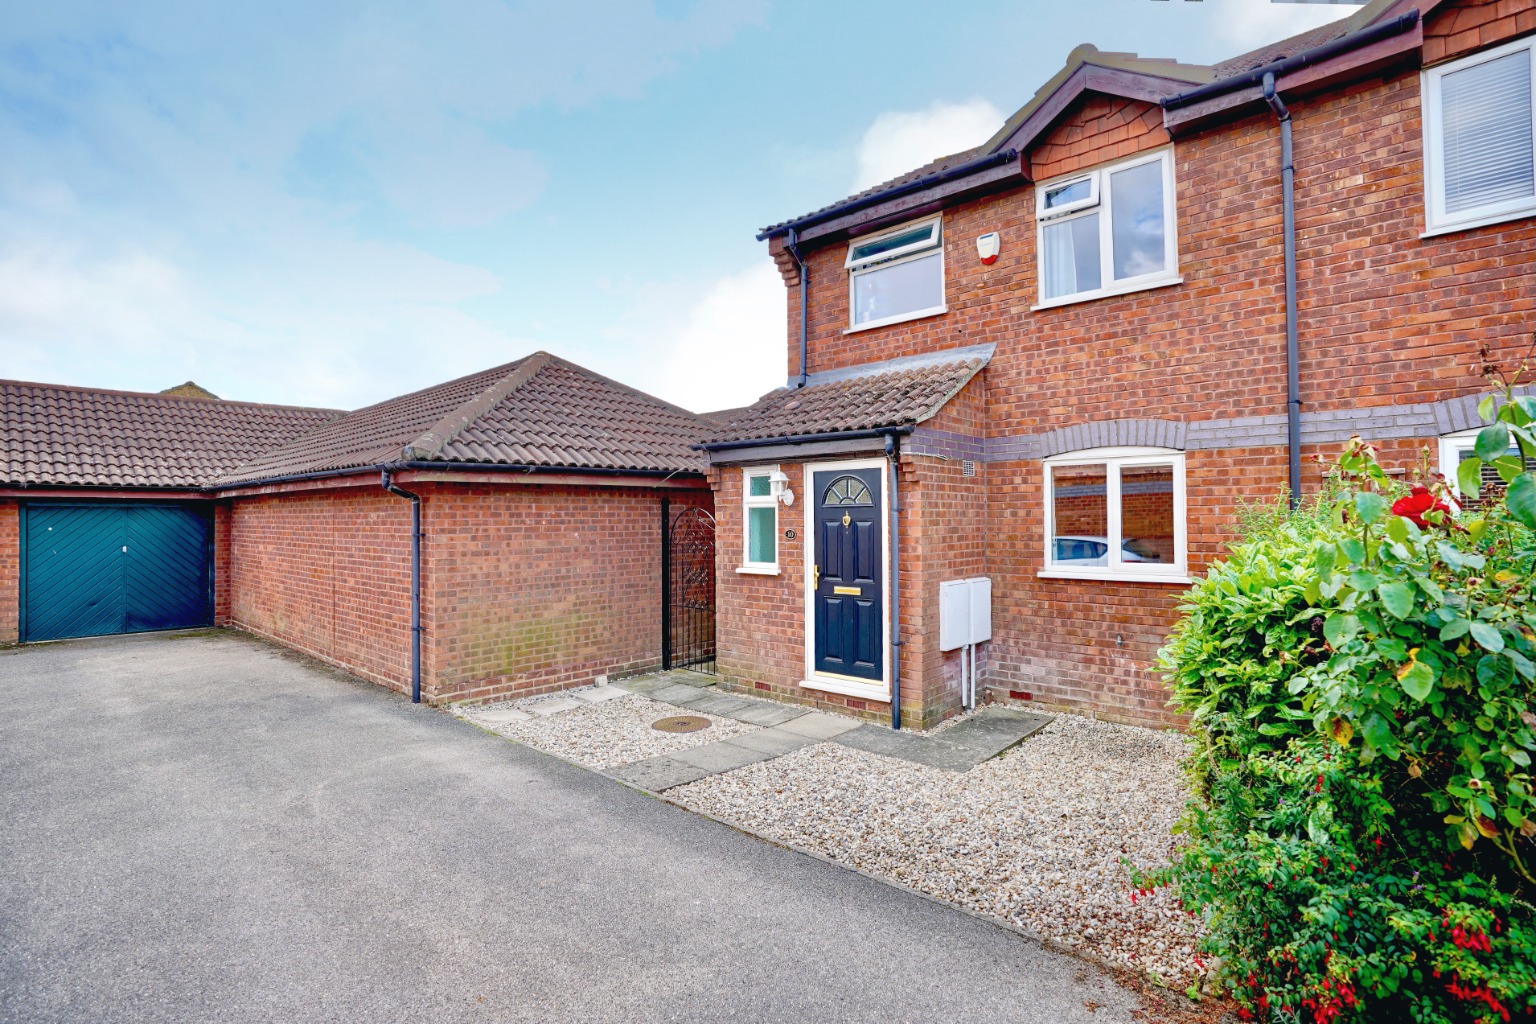 3 bed semi-detached house for sale in Carisbrooke Way, St. Neots - Property Image 1